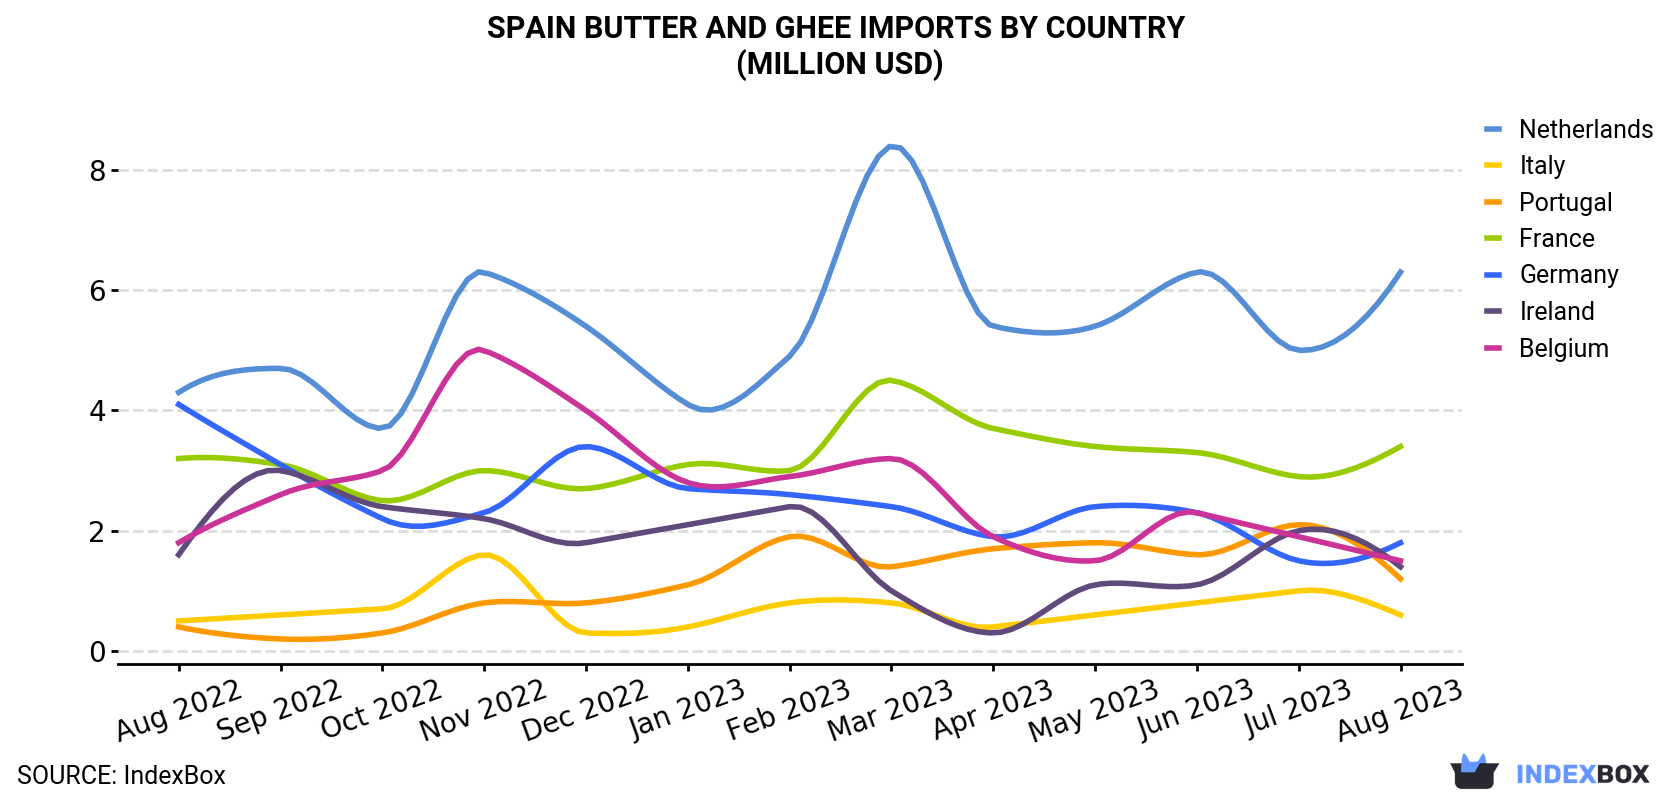 Spain Butter And Ghee Imports By Country (Million USD)